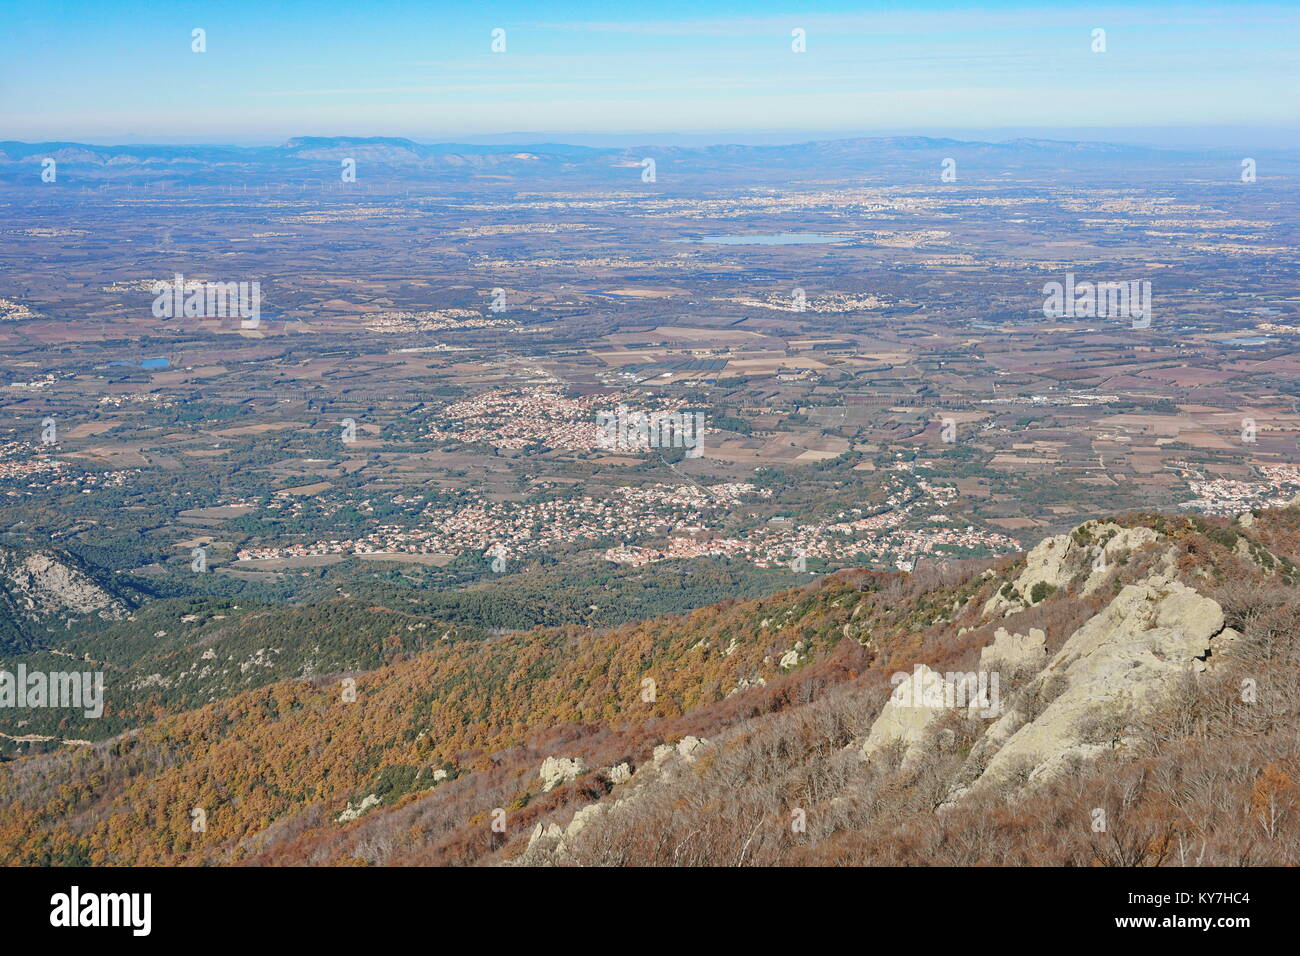 The Roussillon plain in the south of France, Pyrenees Orientales, landscape from the heights of the massif des Alberes Stock Photo